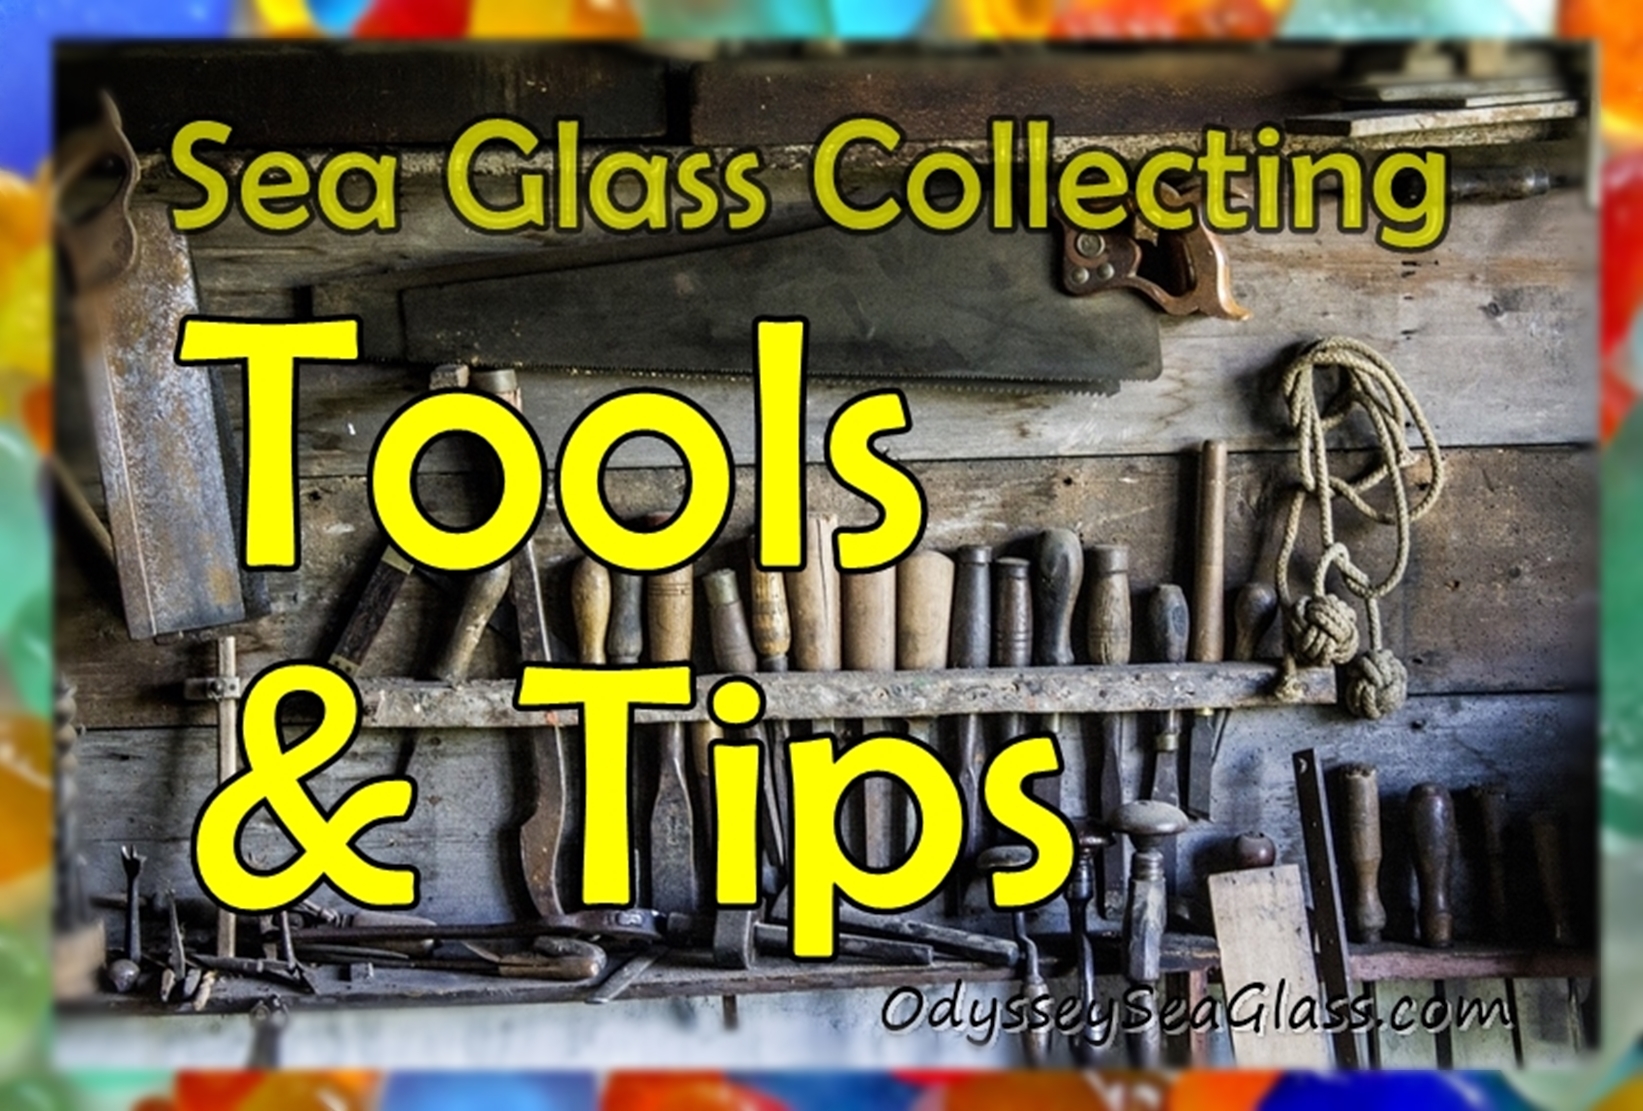 Sea Glass Collecting - Tools and Tips